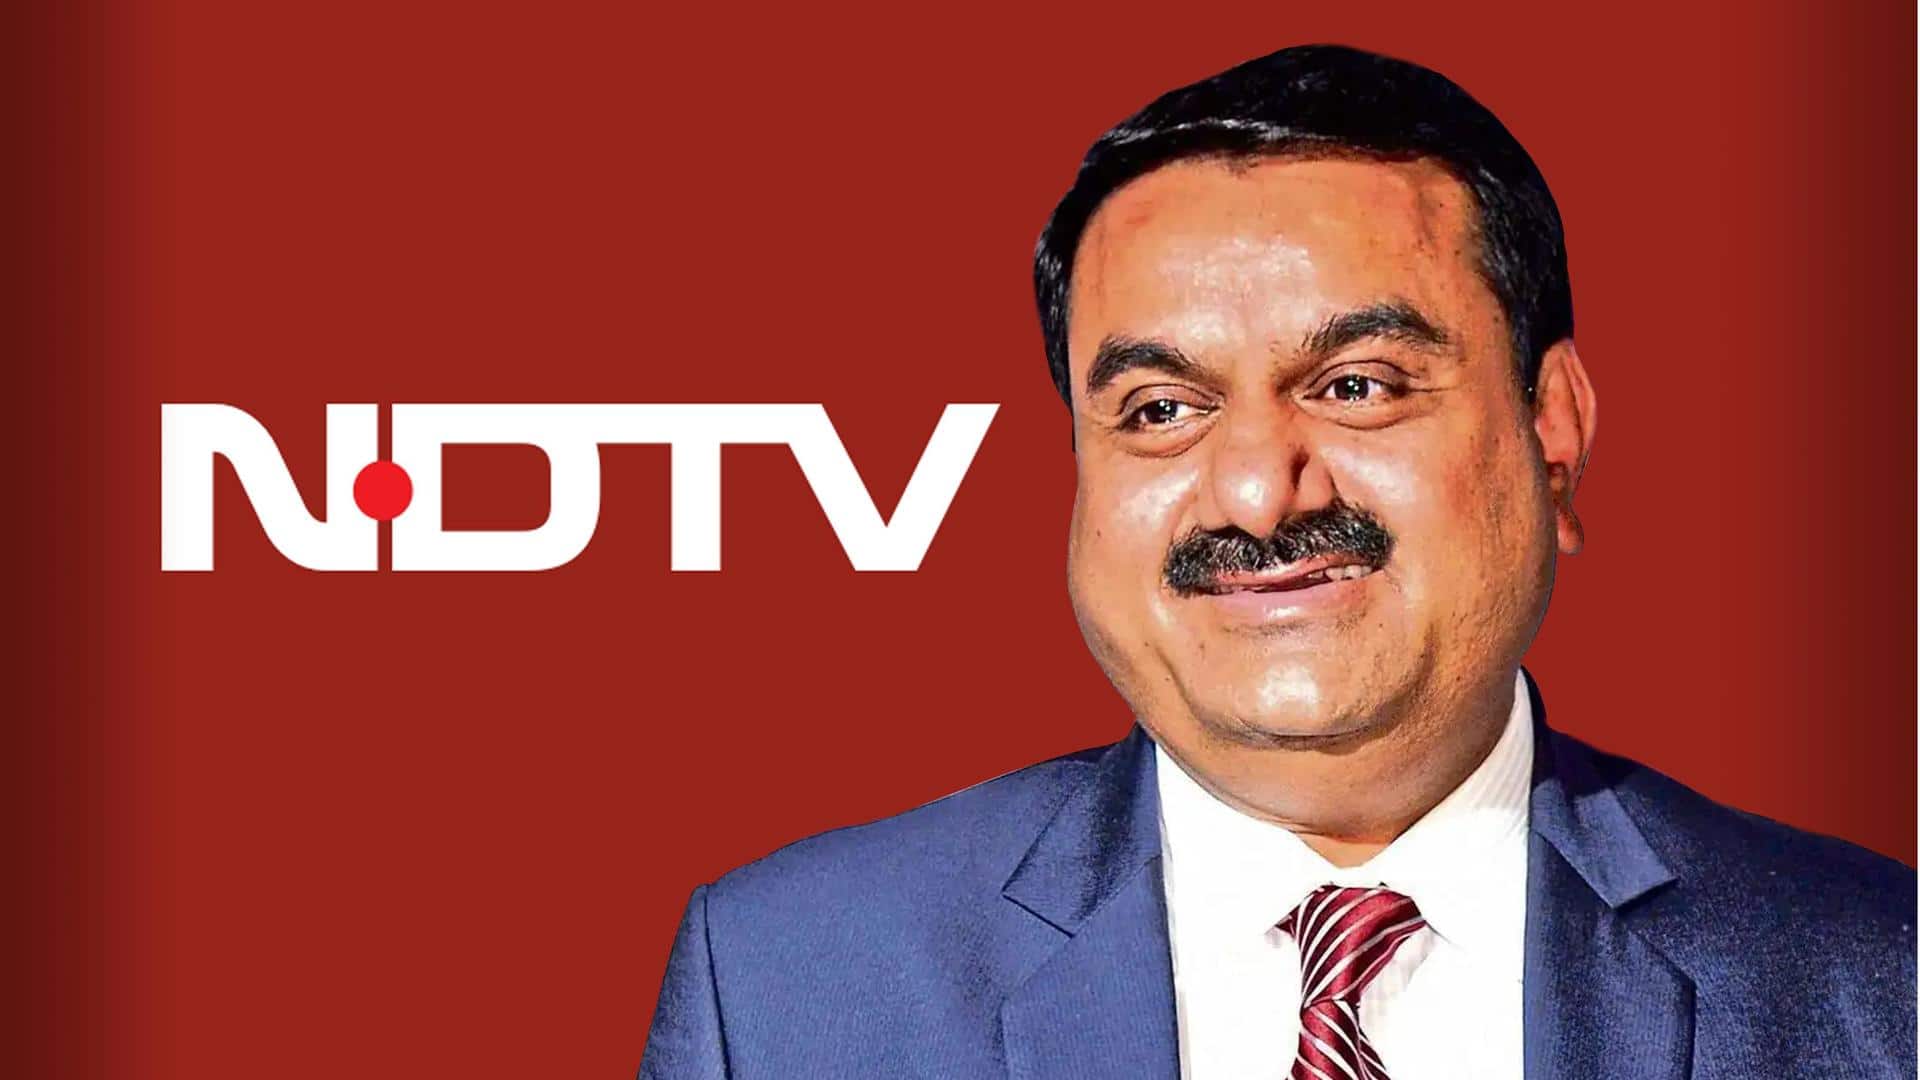 Adani Group opens offer to buy additional 26% NDTV stake